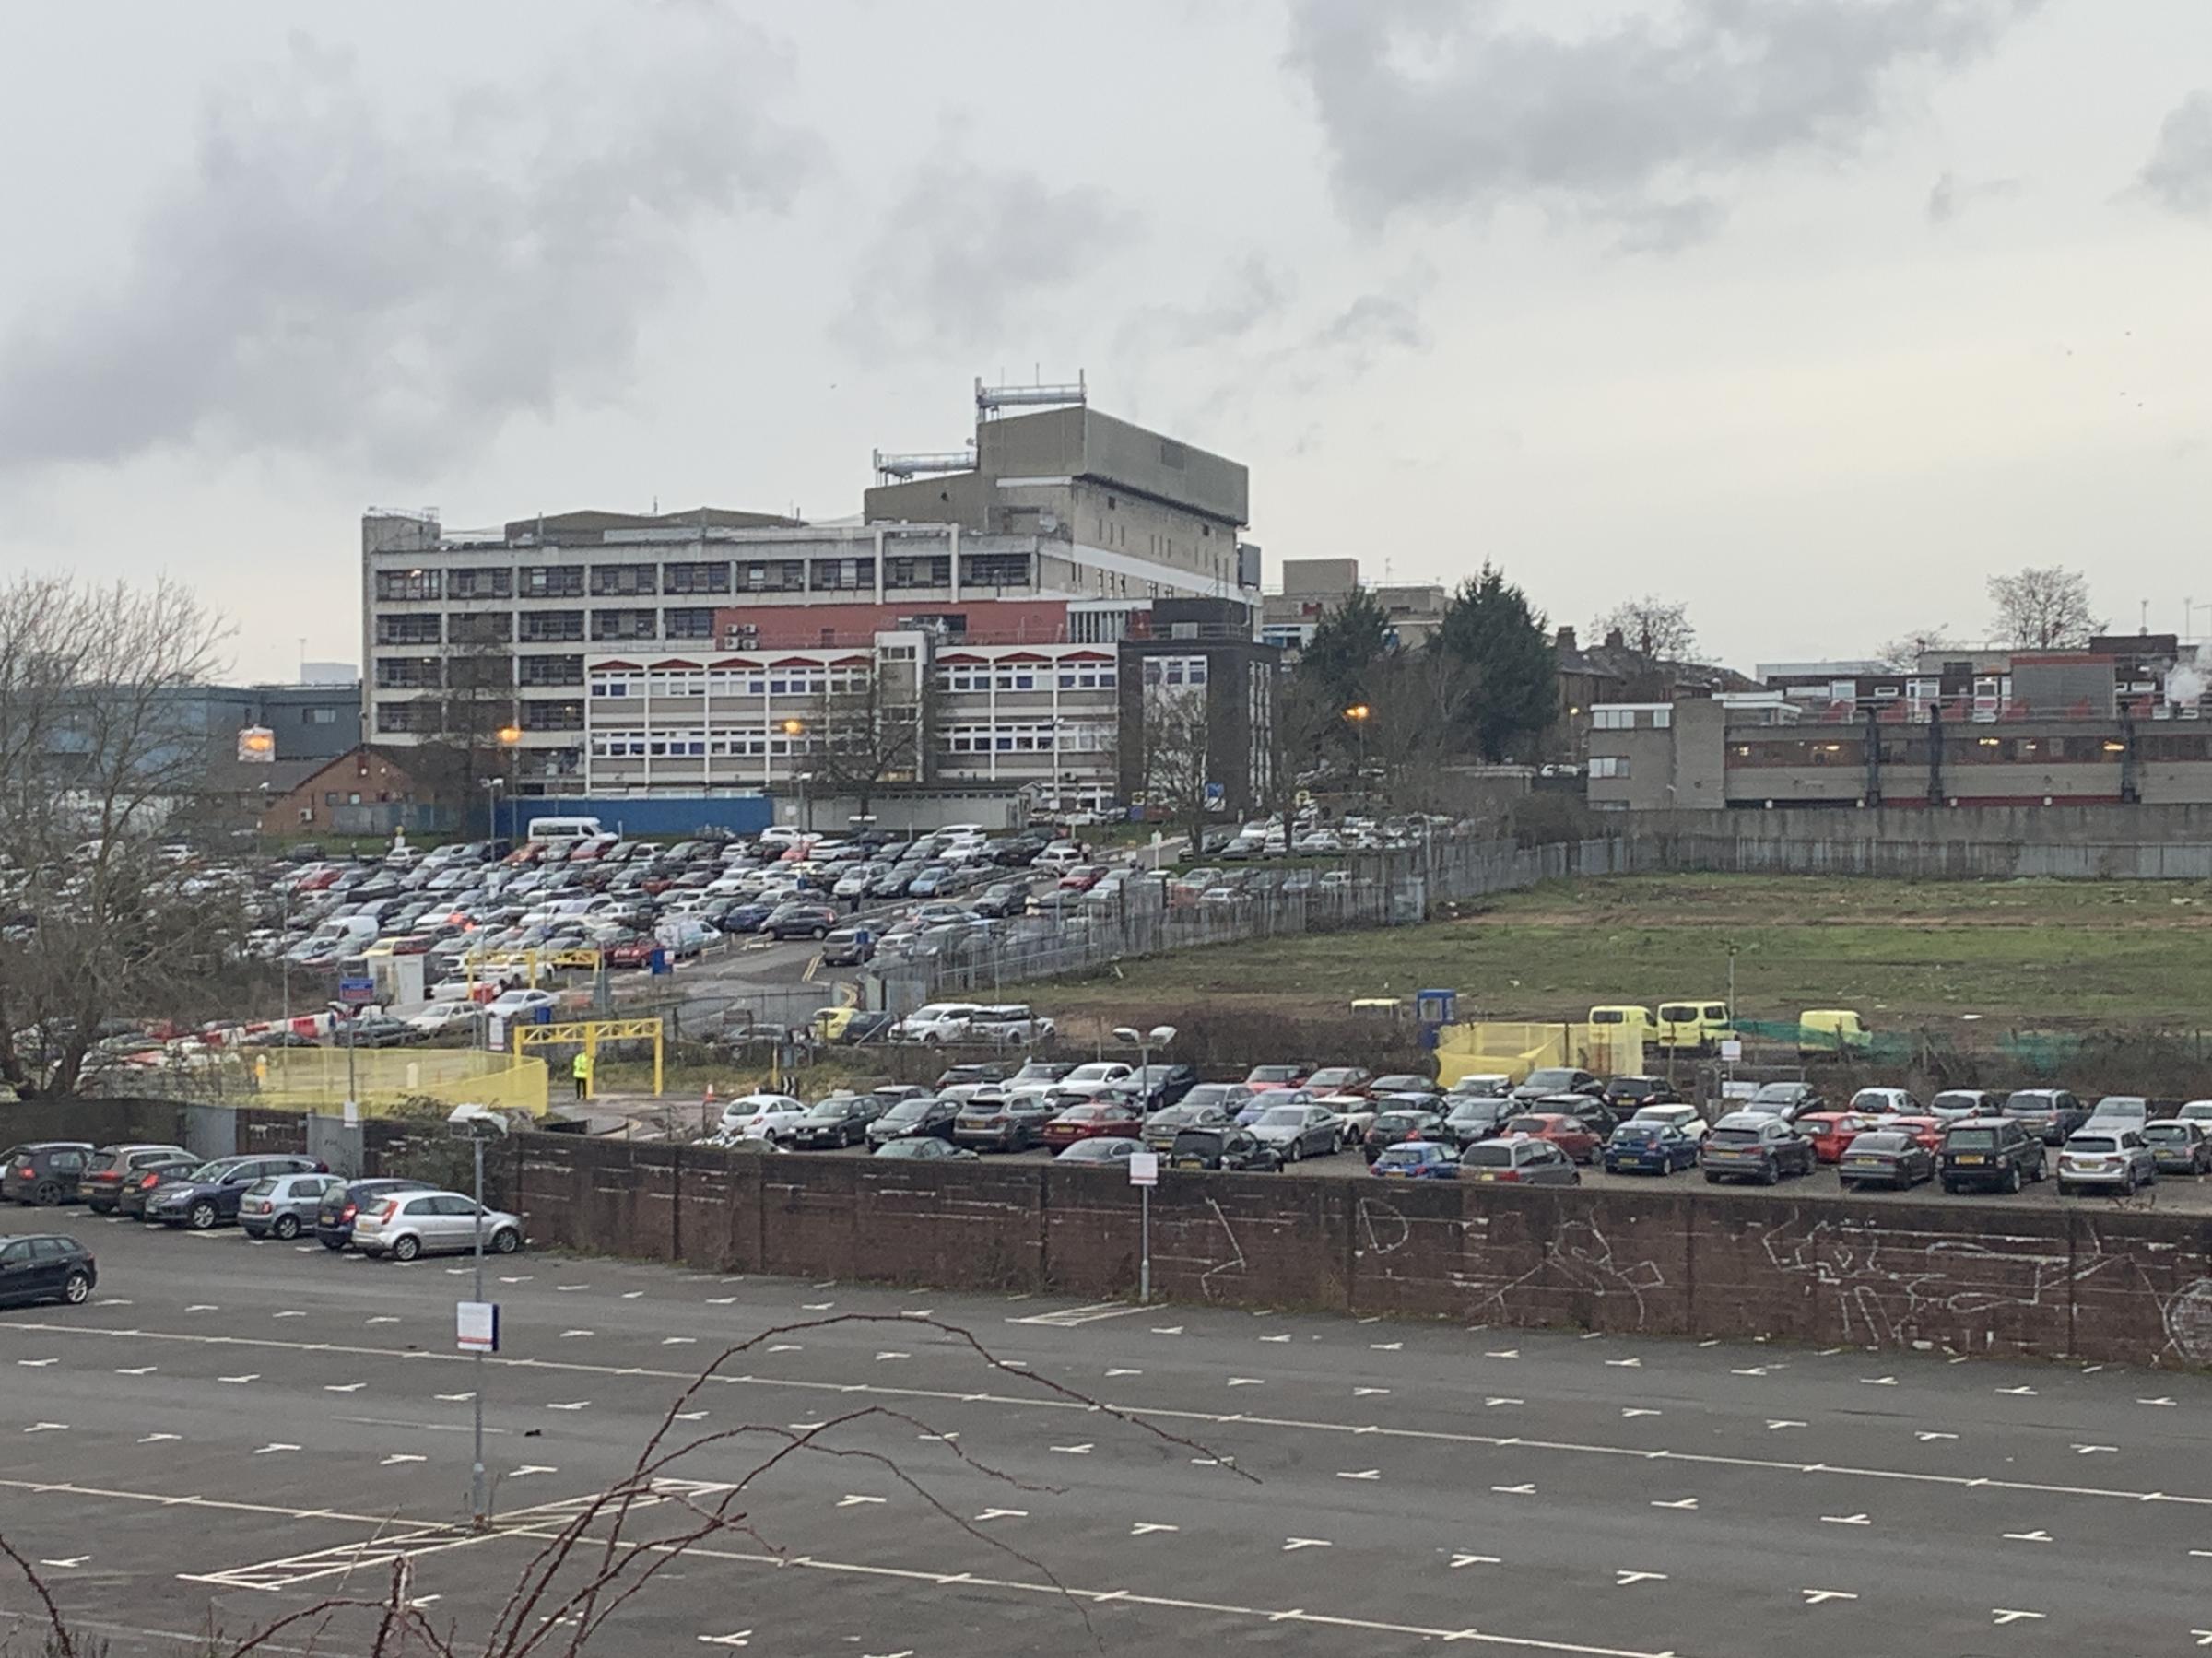 A file photo taken of the current main car park at Watford General with the hospital in the background